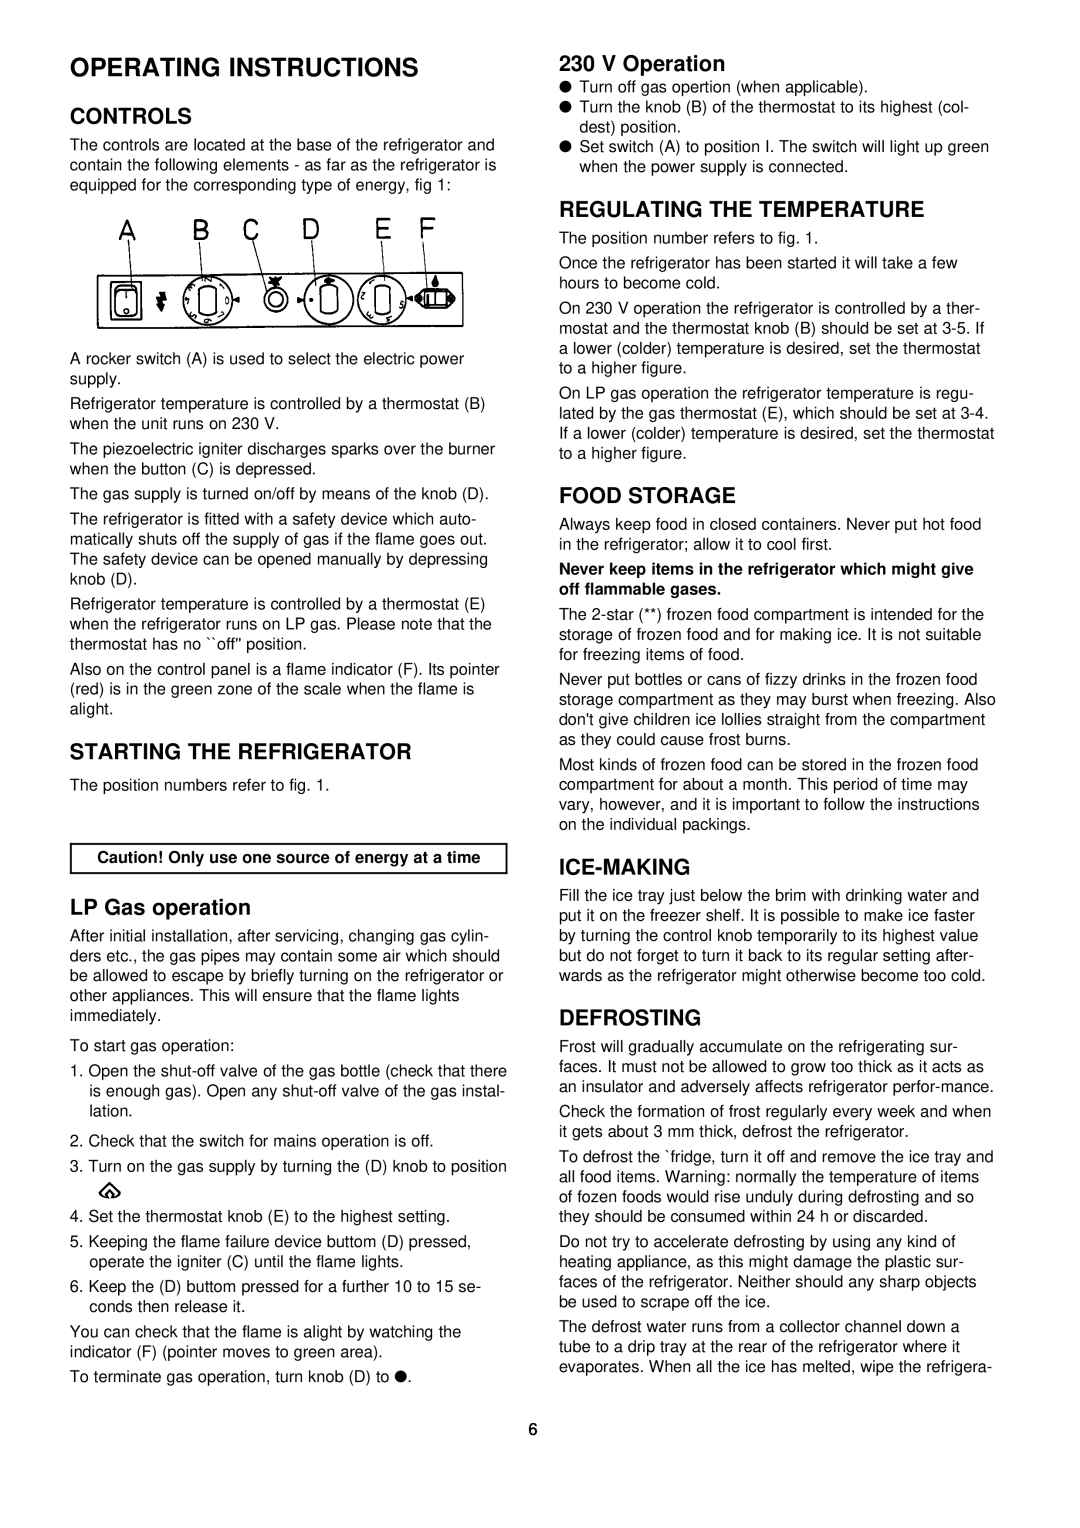 Frigidaire S105GE Operating Instructions, Controls, Starting The Refrigerator, LP Gas operation, V Operation, Food Storage 